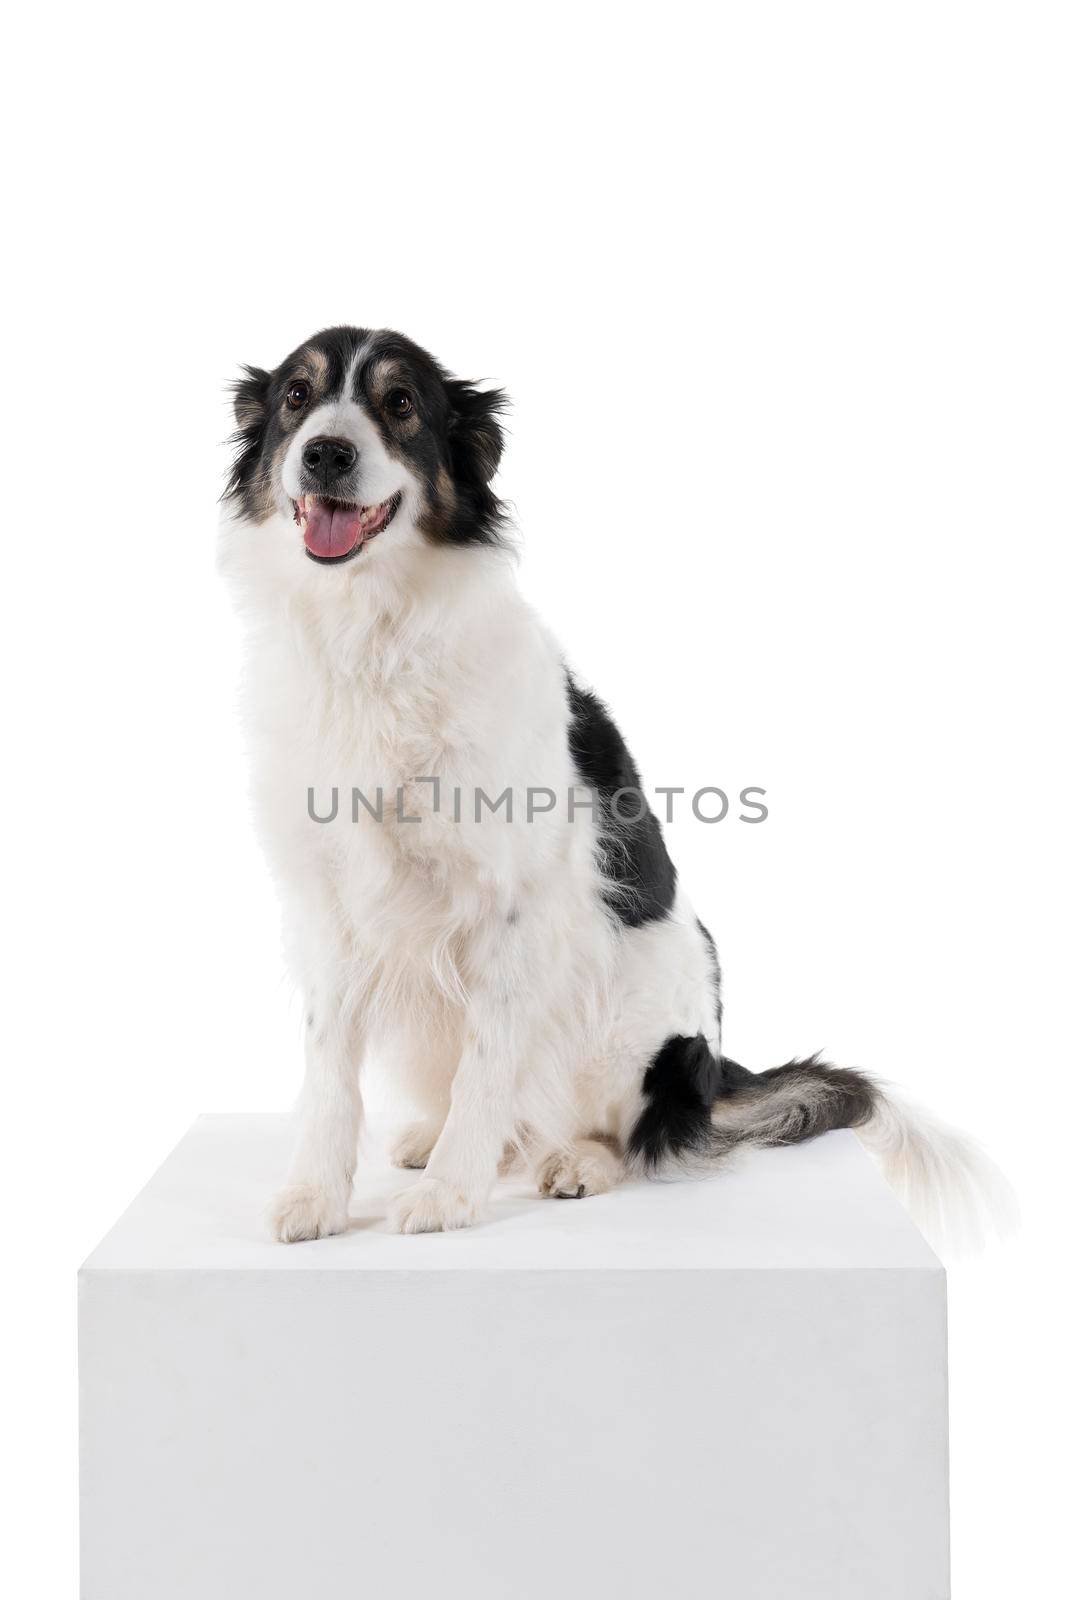 a Black and white Australian Shepherd dog sitting isolated in white background  looking front view by LeoniekvanderVliet